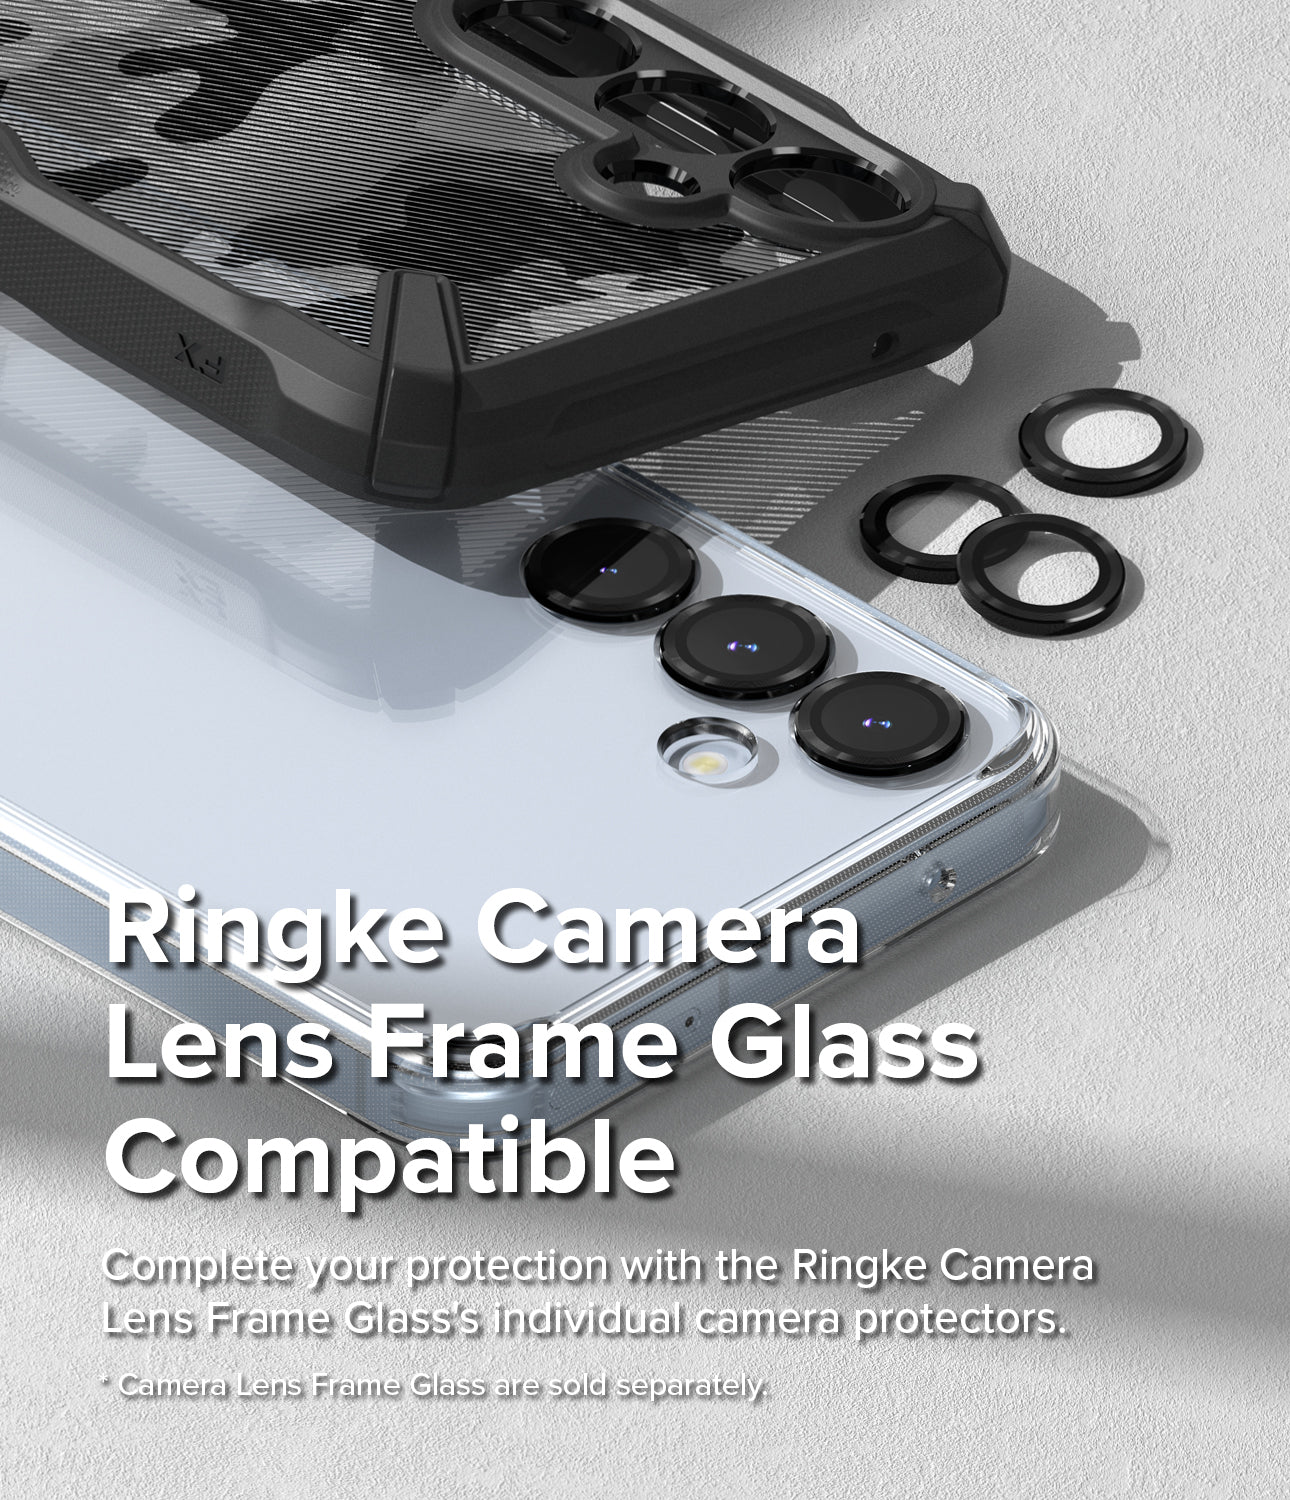 Galaxy A35 Case | Fusion Card - Ringke Camera Lens Frame Glass Compatible. Complete your protection with the Ringke Camera Lens Frame Glass' individual camera protectors.